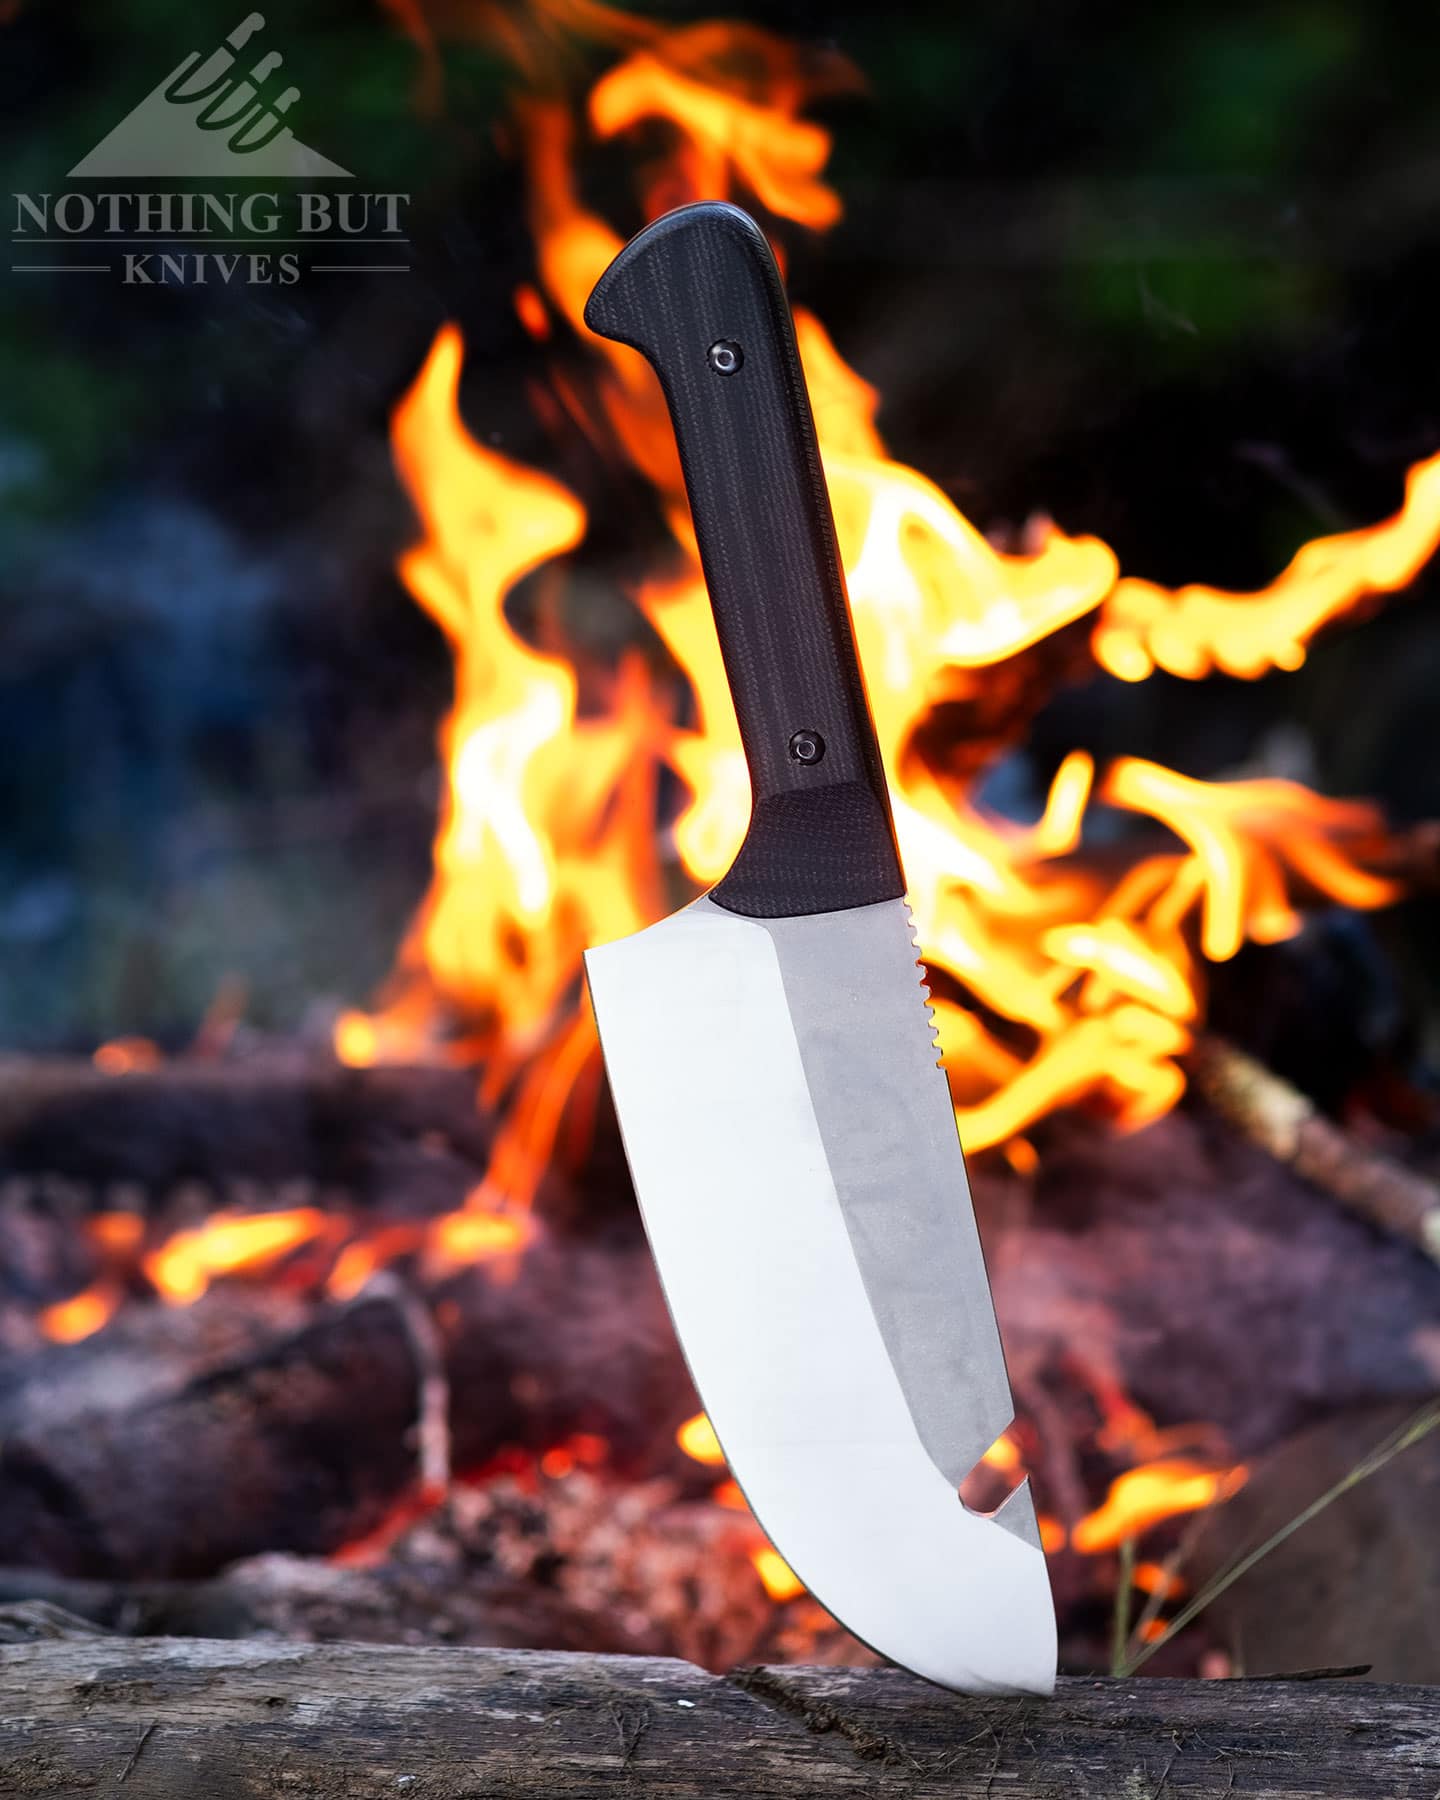 Camping with the Maxsa Blade bushcraft chef knife shown here in front of a campfire. 